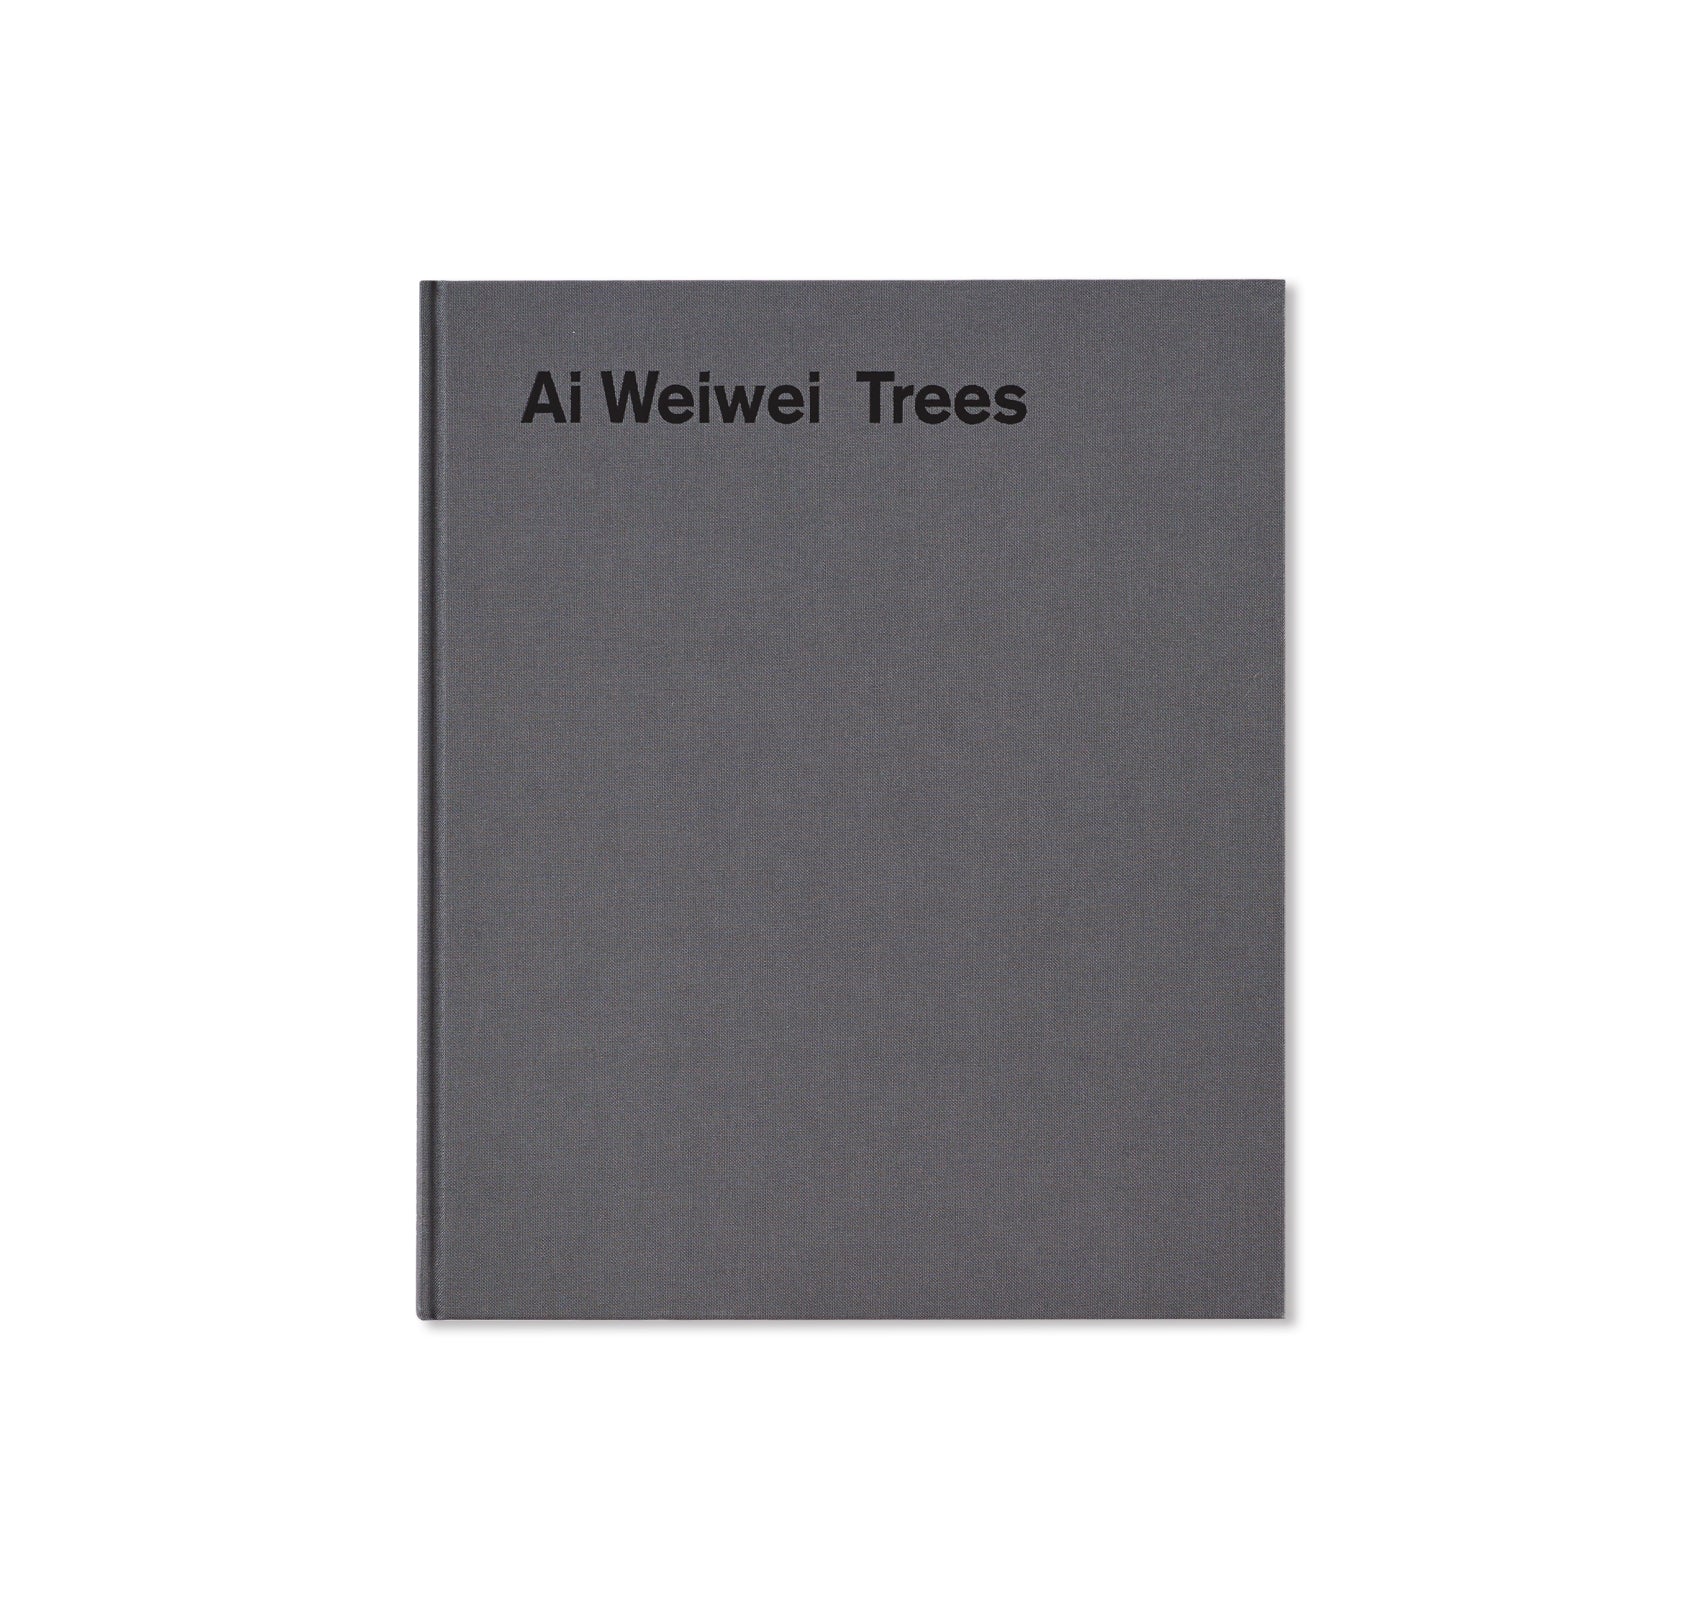 TREES by Ai Weiwei